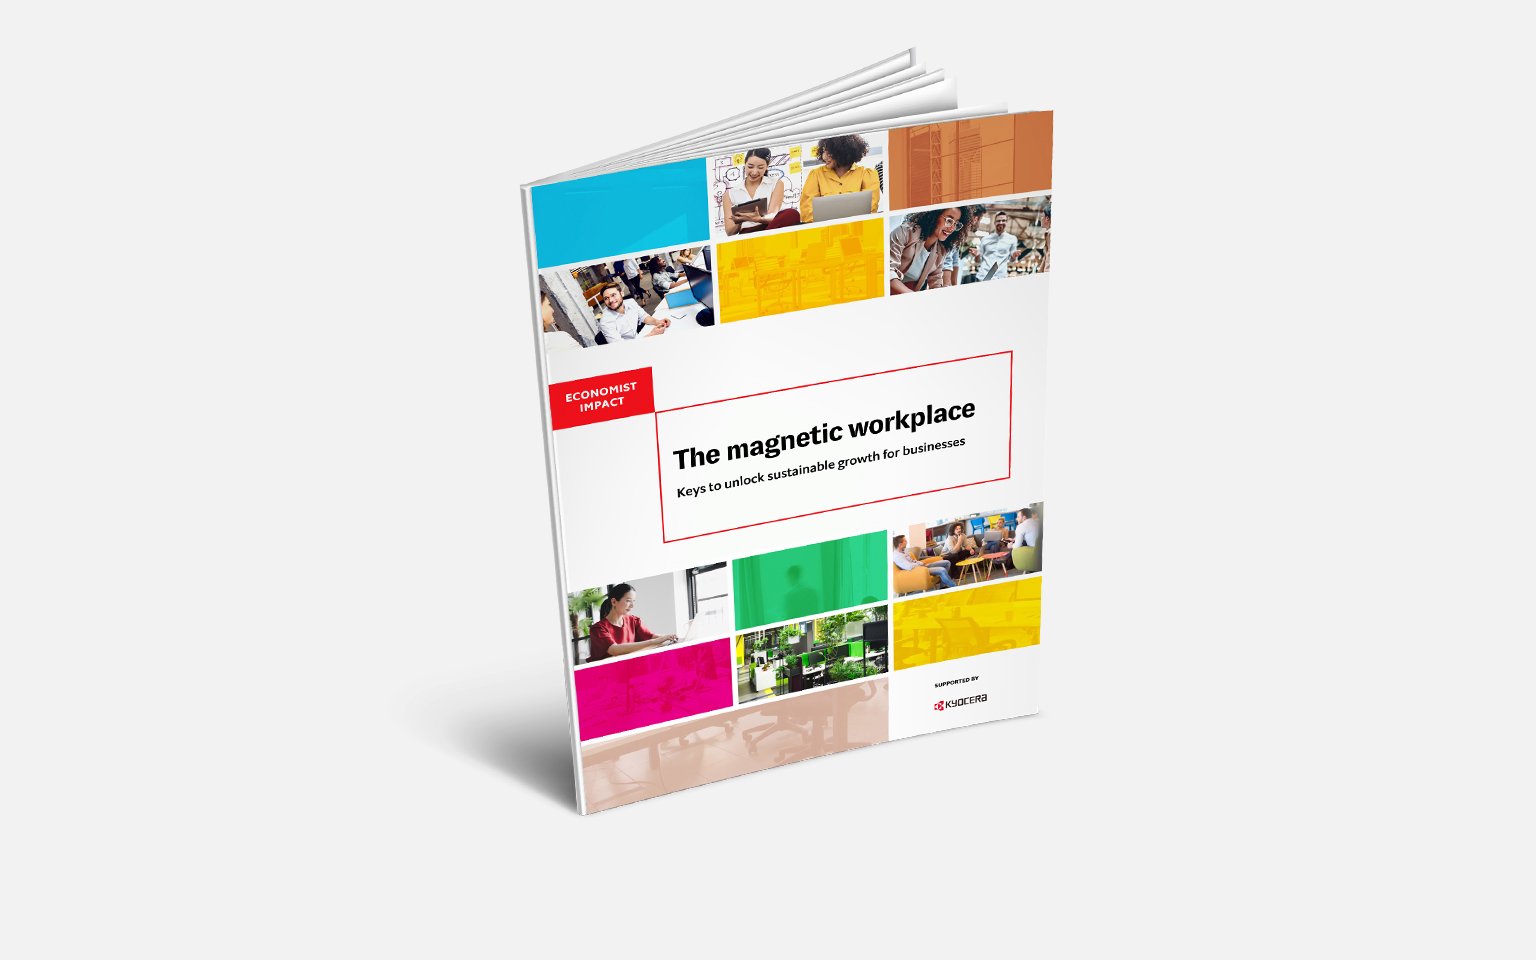 The Magnetic Workplace Content Hub